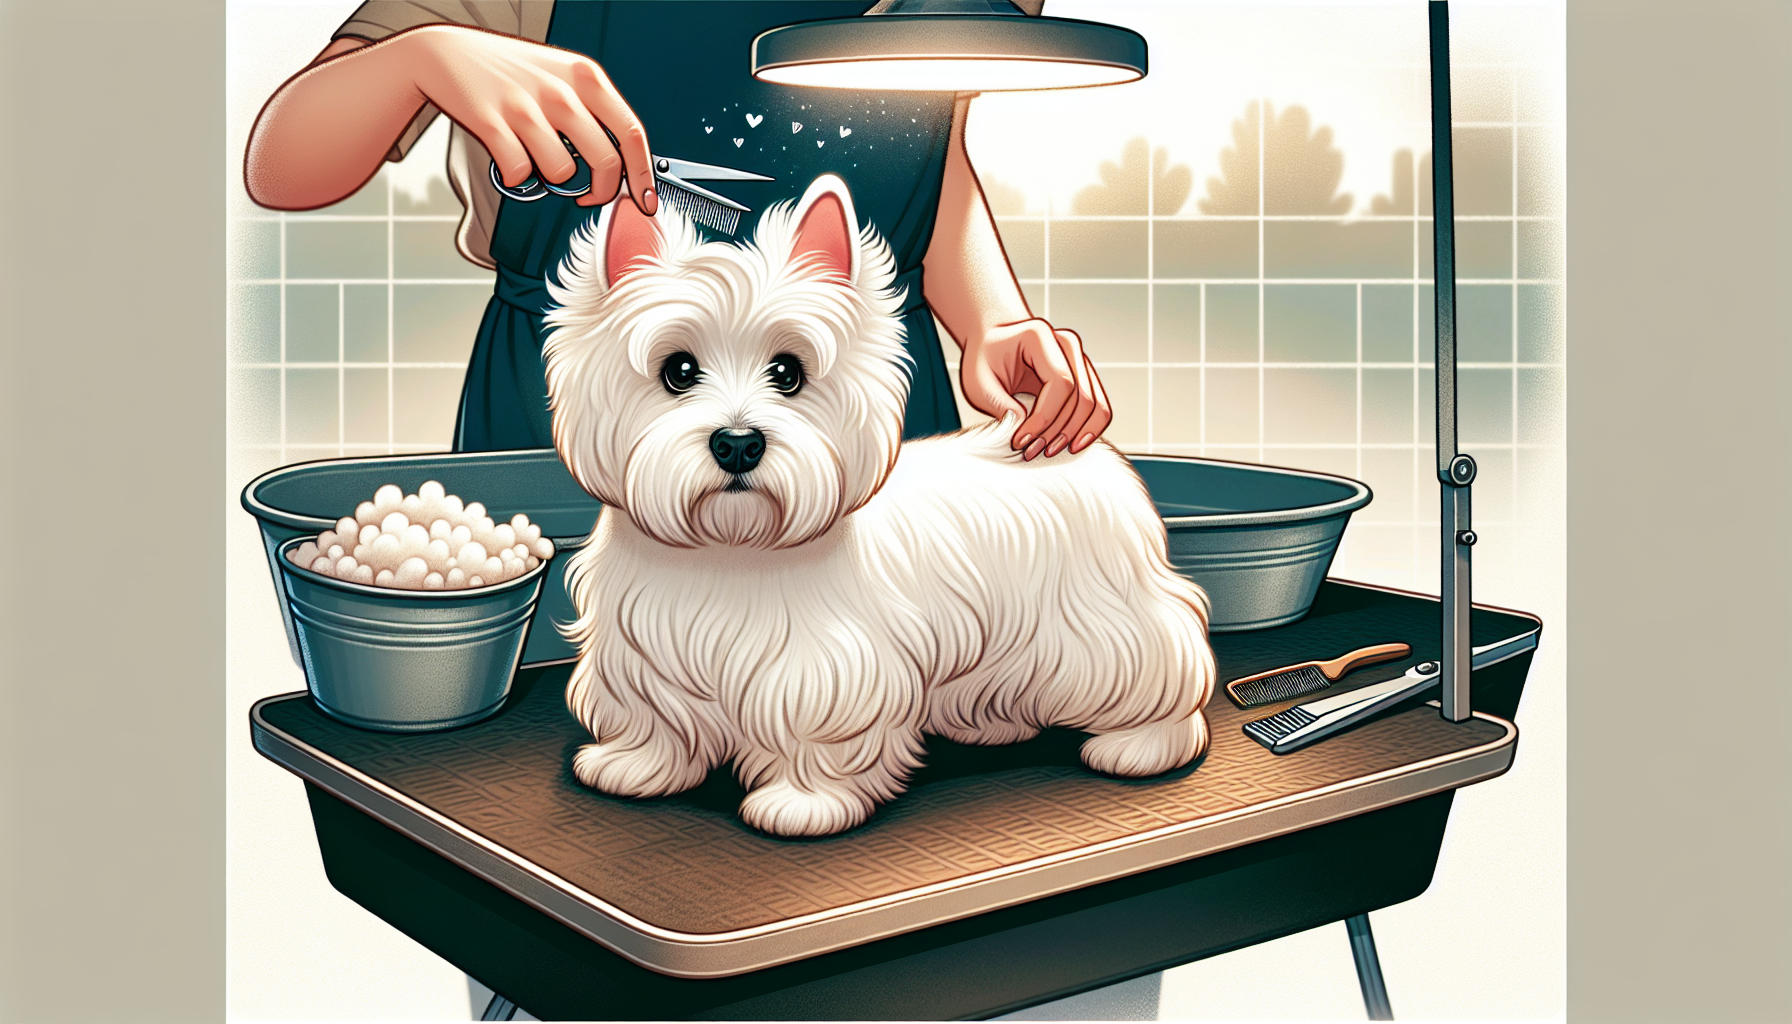 Illustration of a West Highland White Terrier being groomed